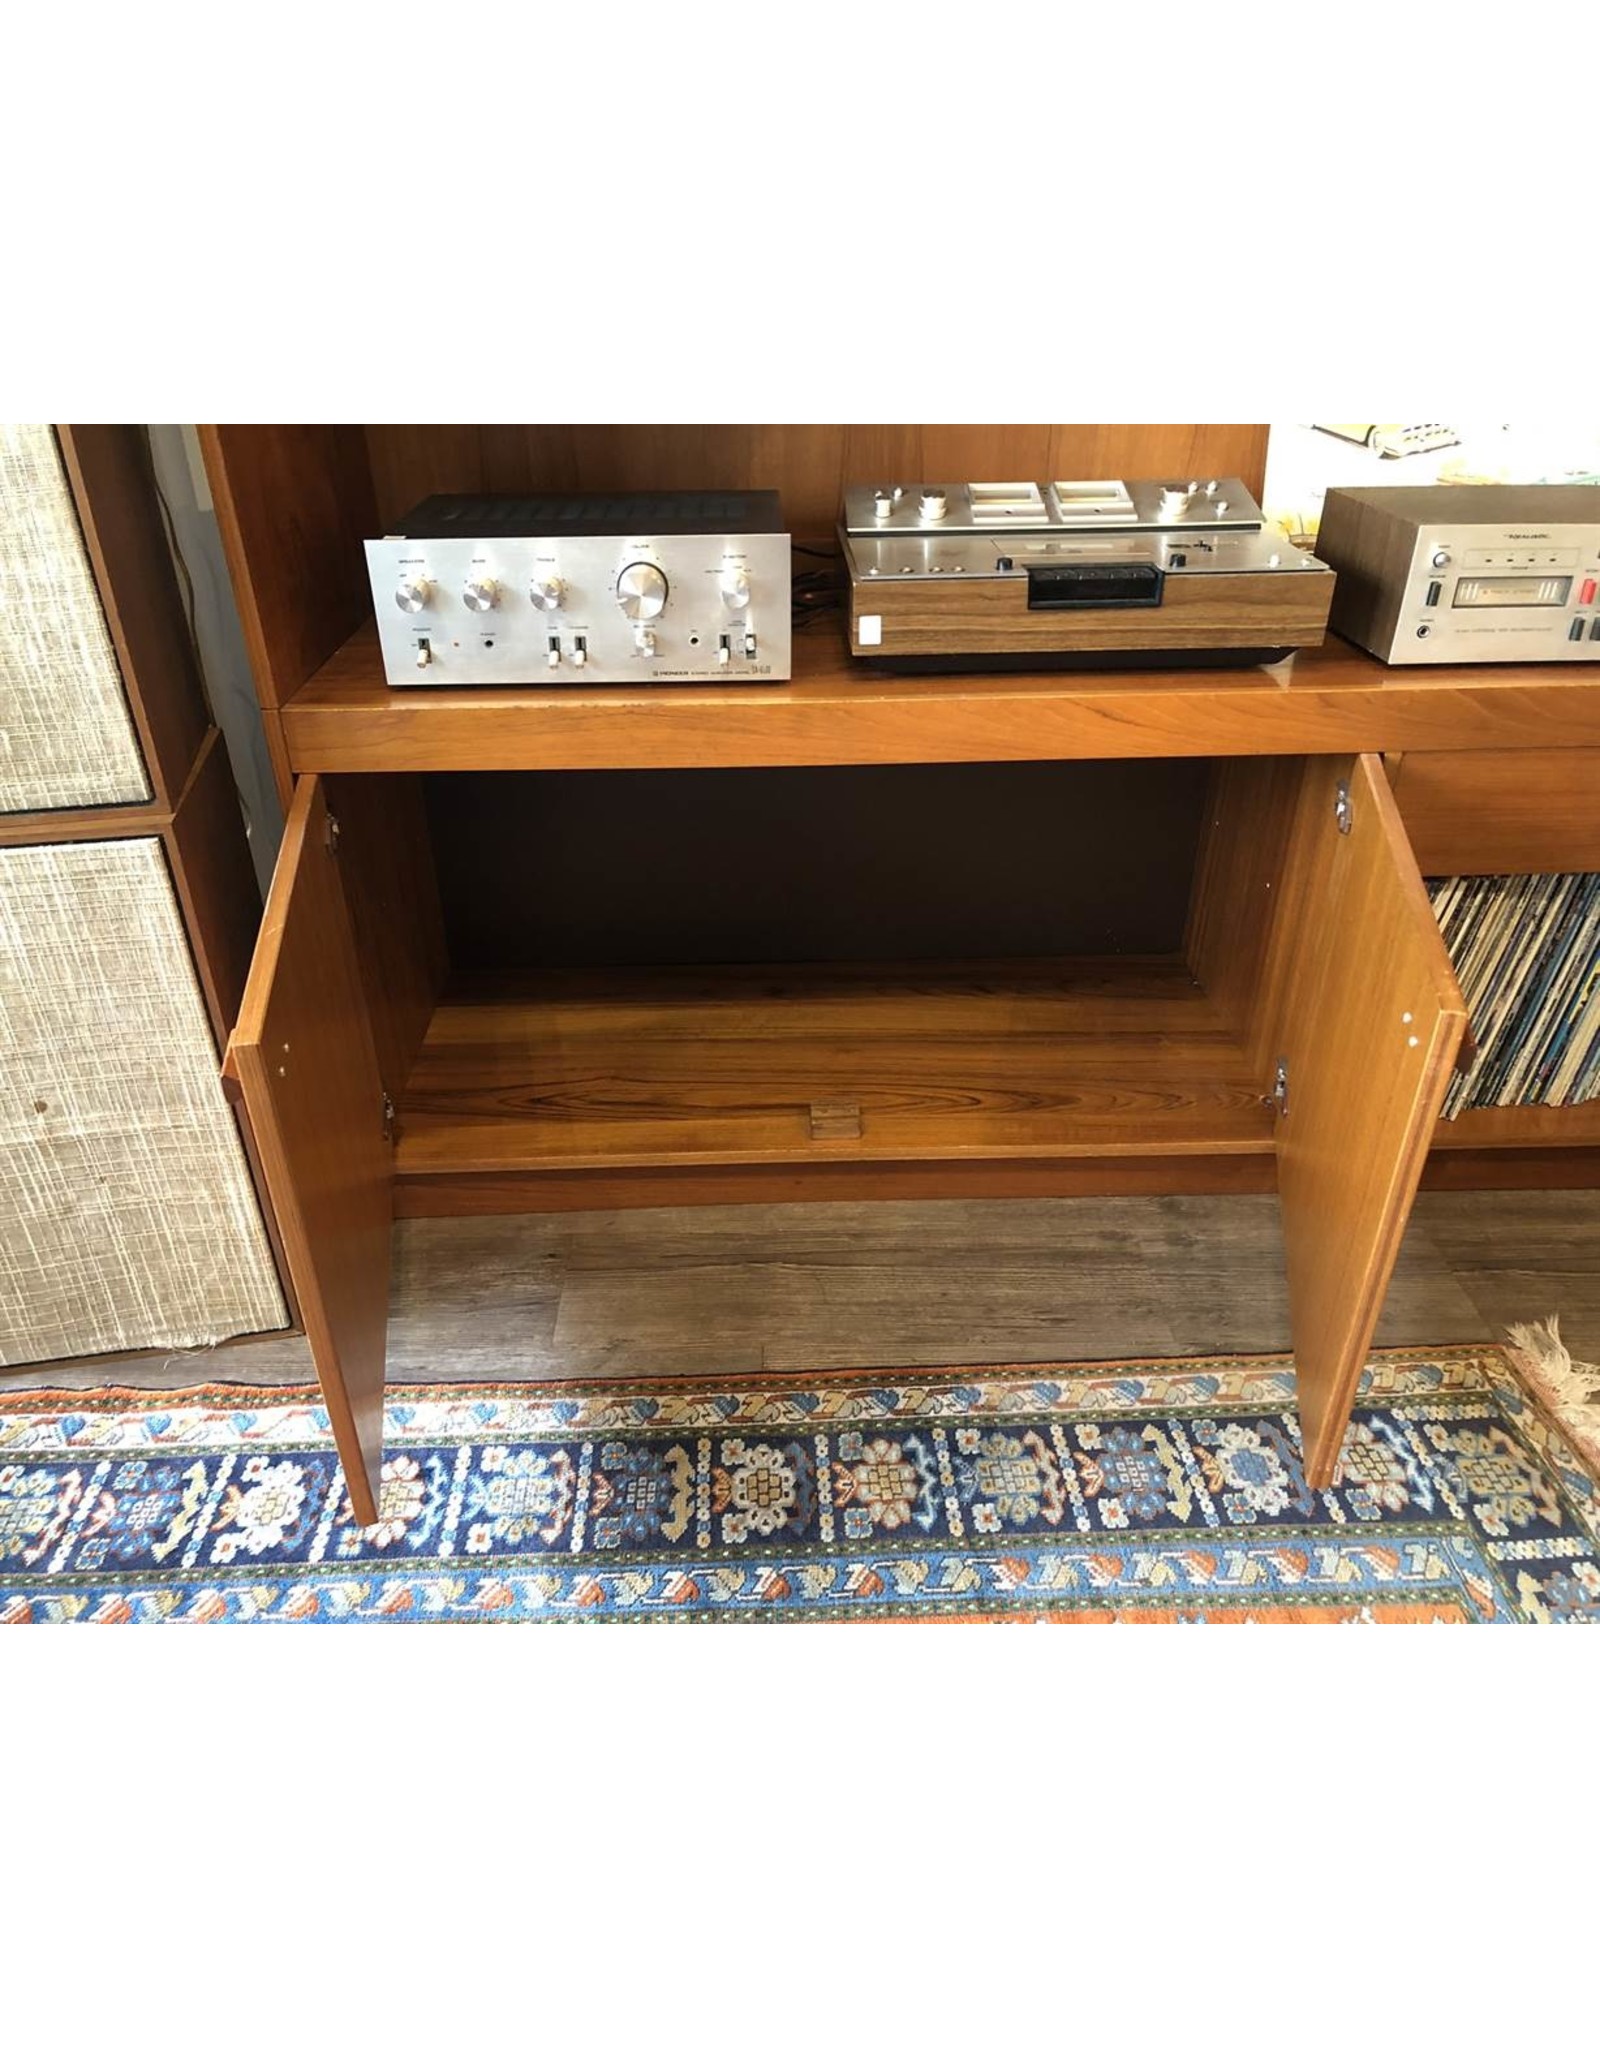 Teak mid century stereo console - unique sliding two door glass display cabinet, width 5'3", depth 1'8", height 5'3"